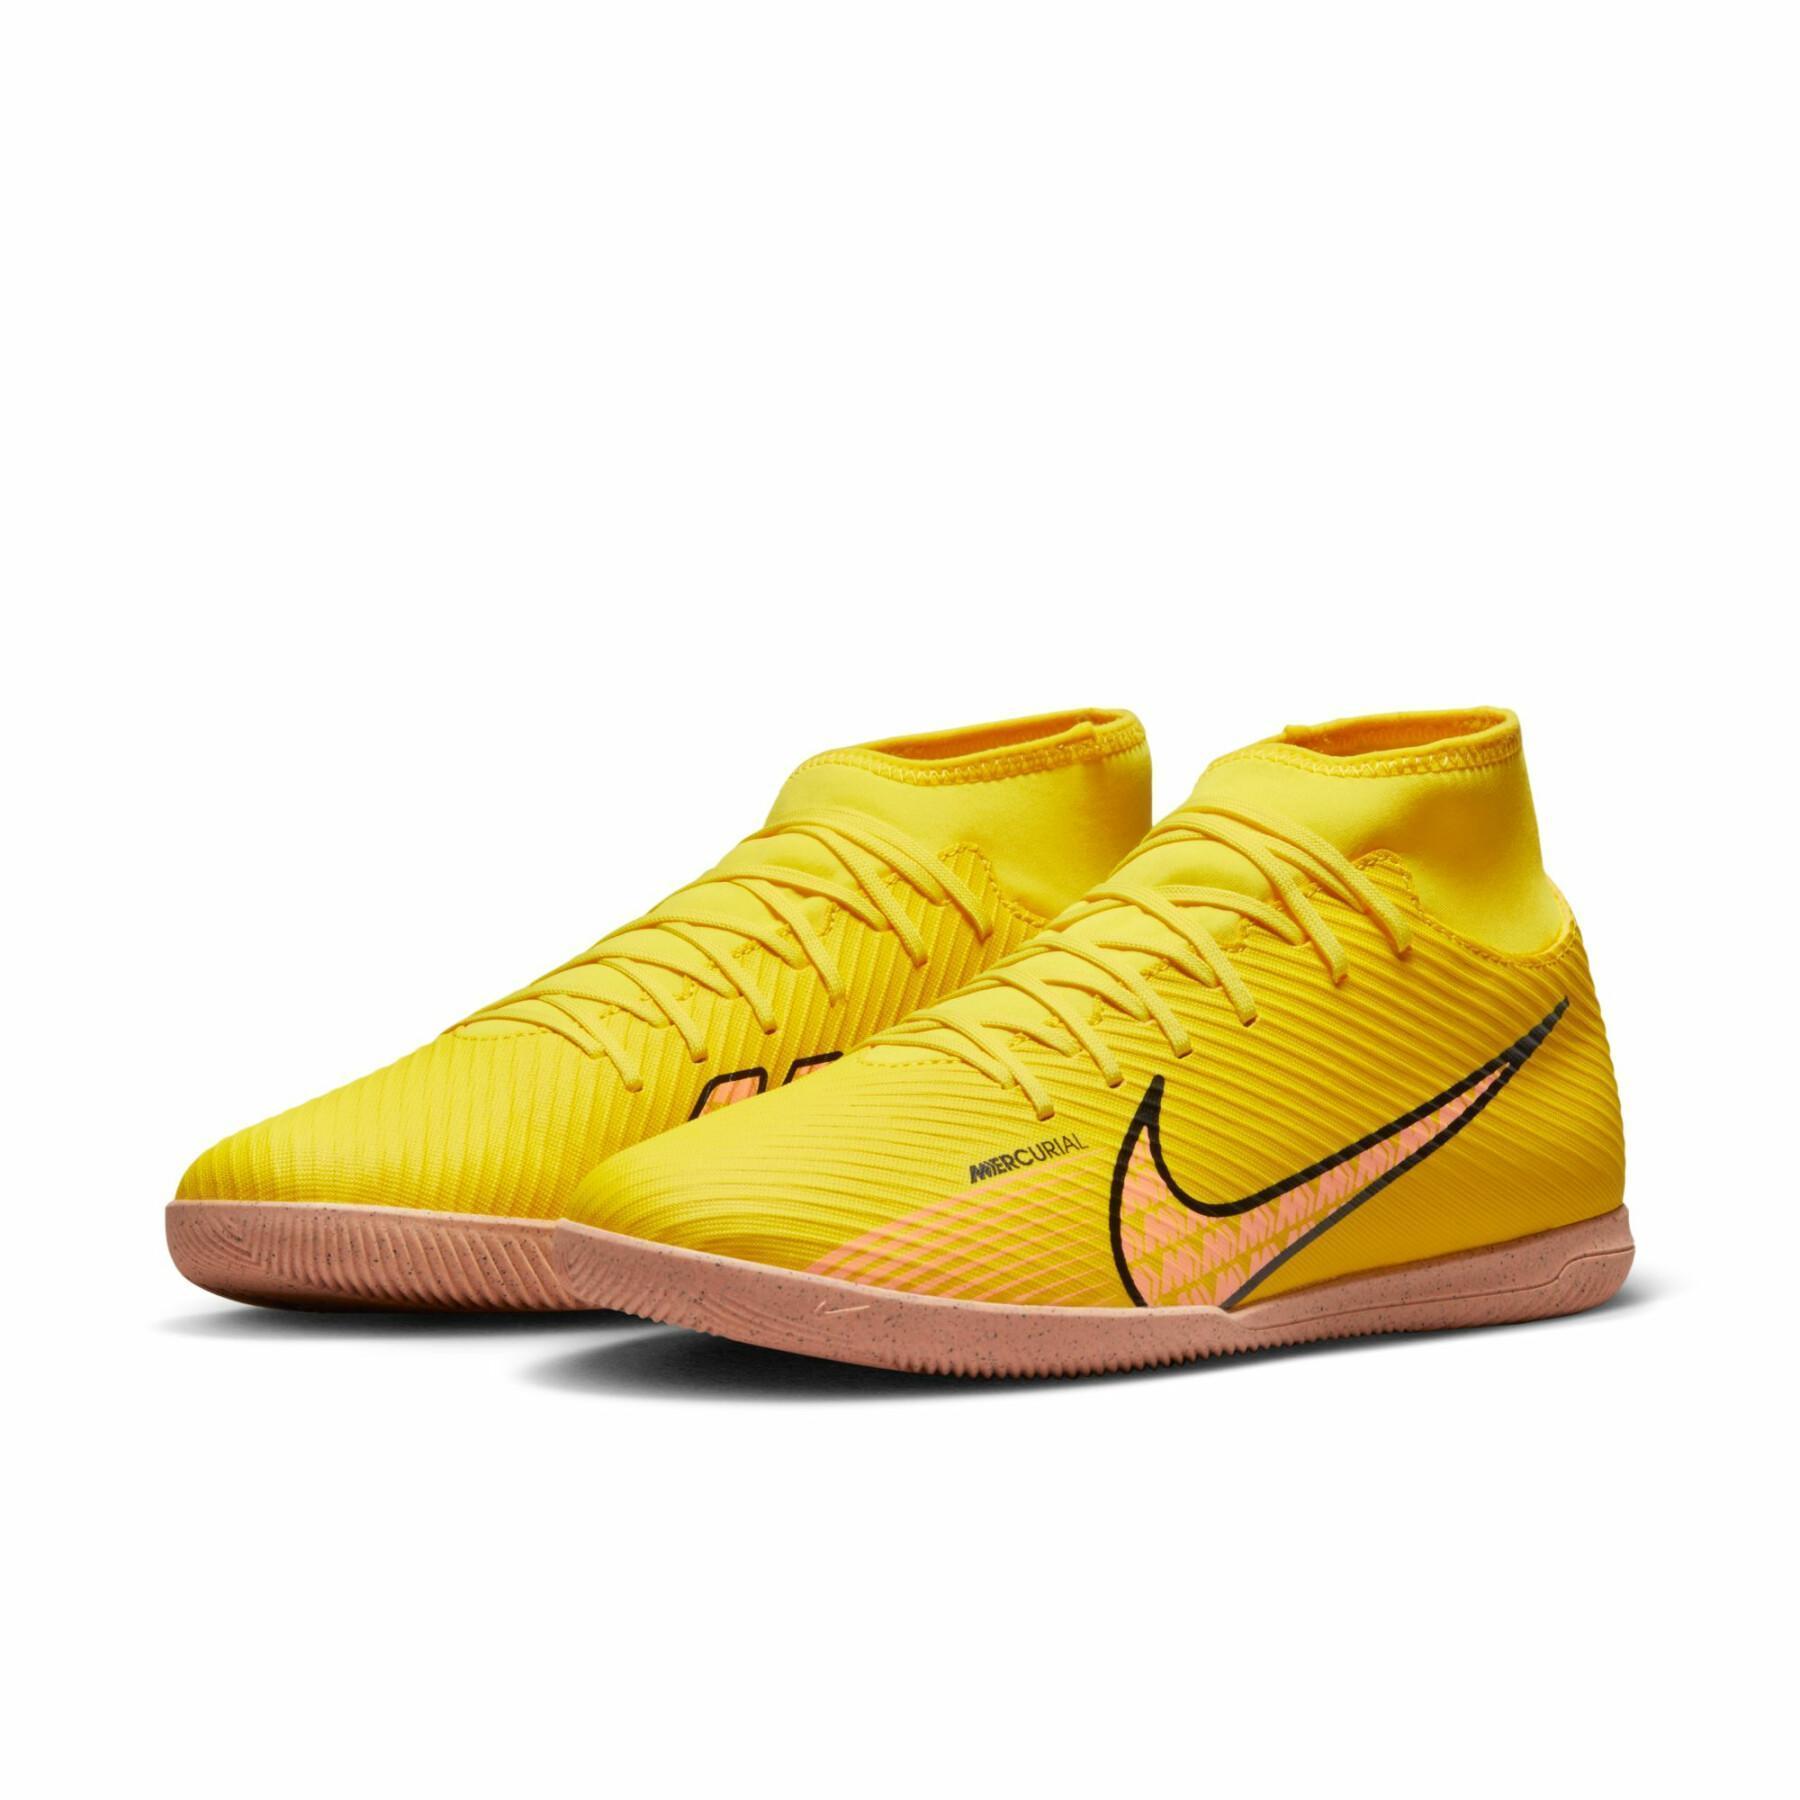 Chaussures de football Nike Mercurial Superfly 9 Club IC - Lucent Pack